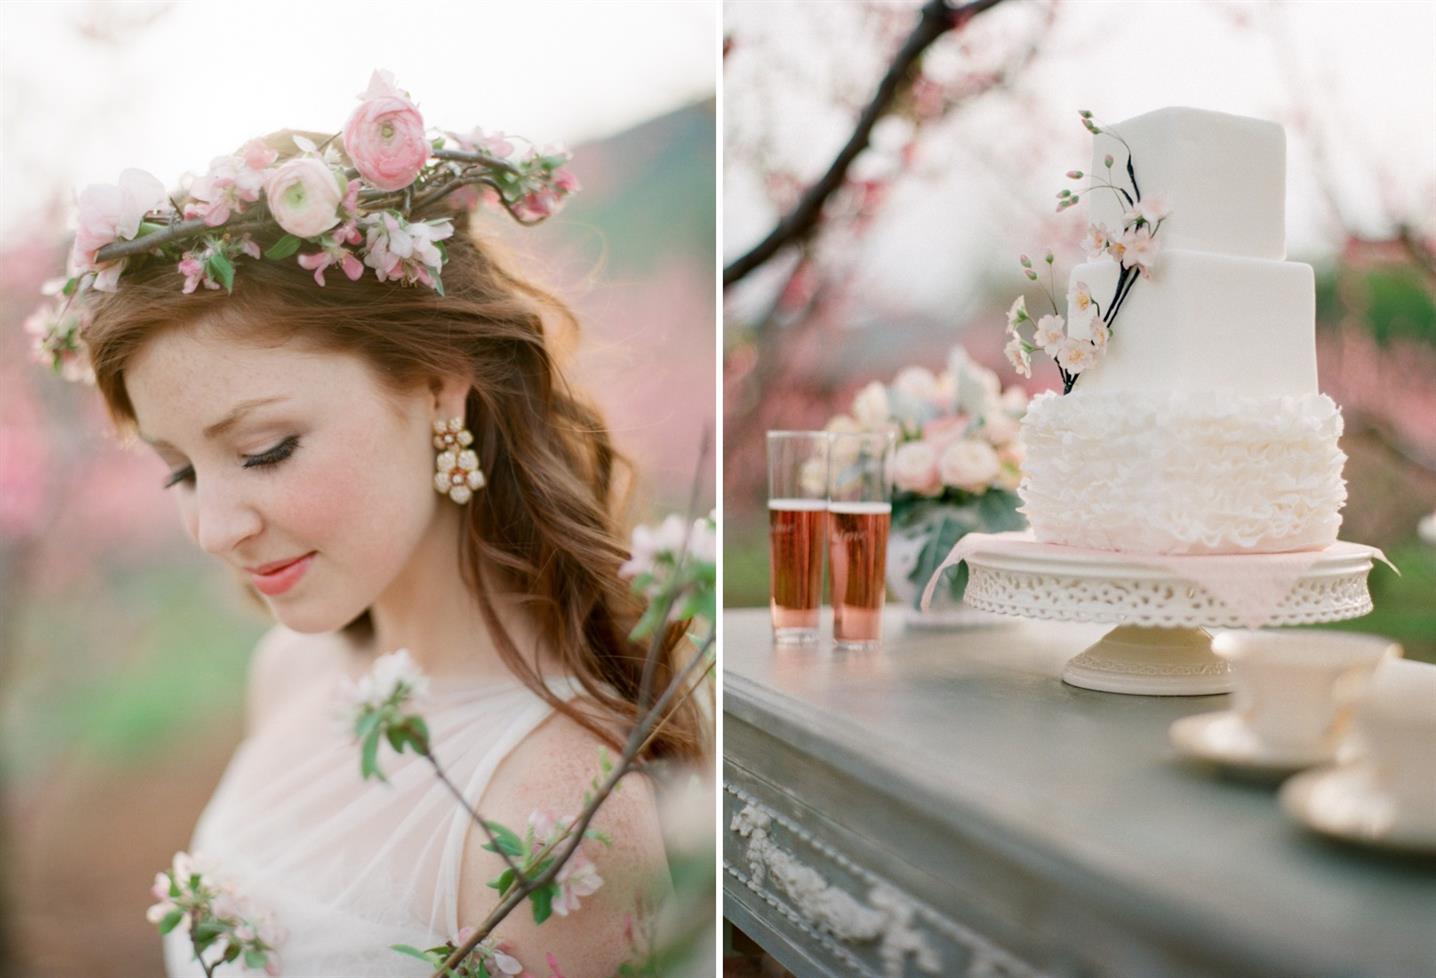 Beautiful Blossom-Filled Spring Wedding Ideas In An Orchard